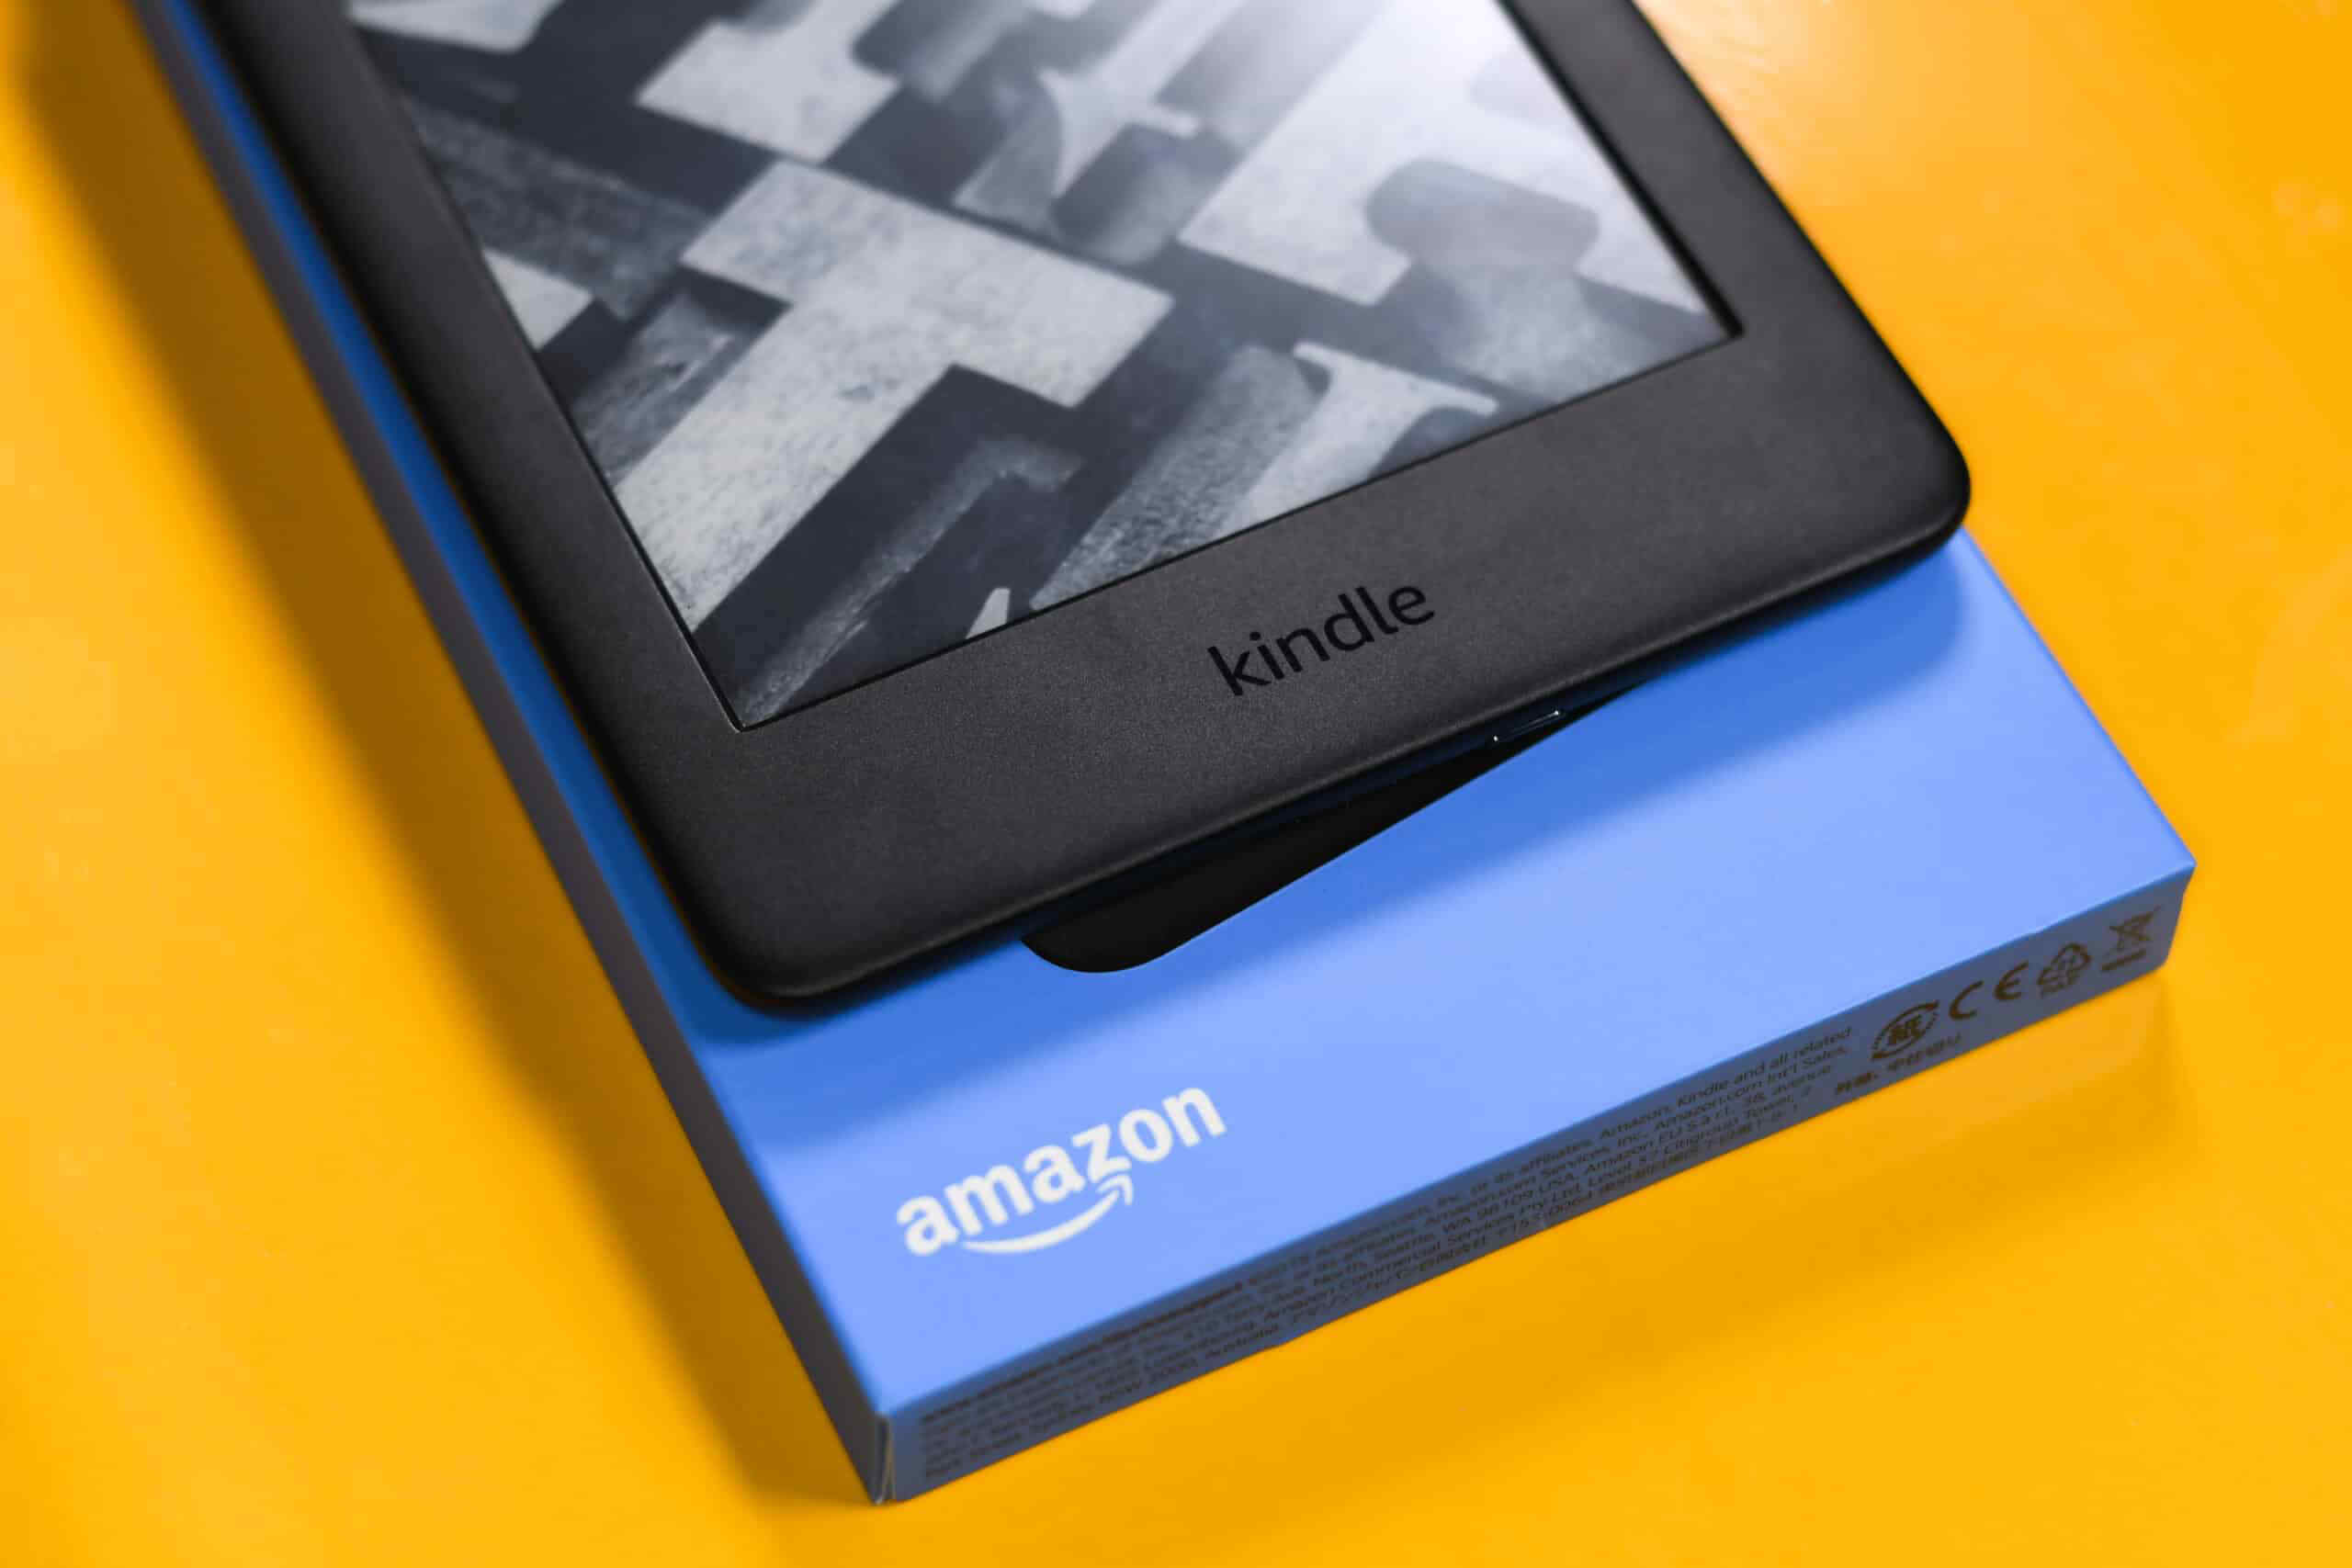 11 Reasons to Avoid a Kindle Paperwhite